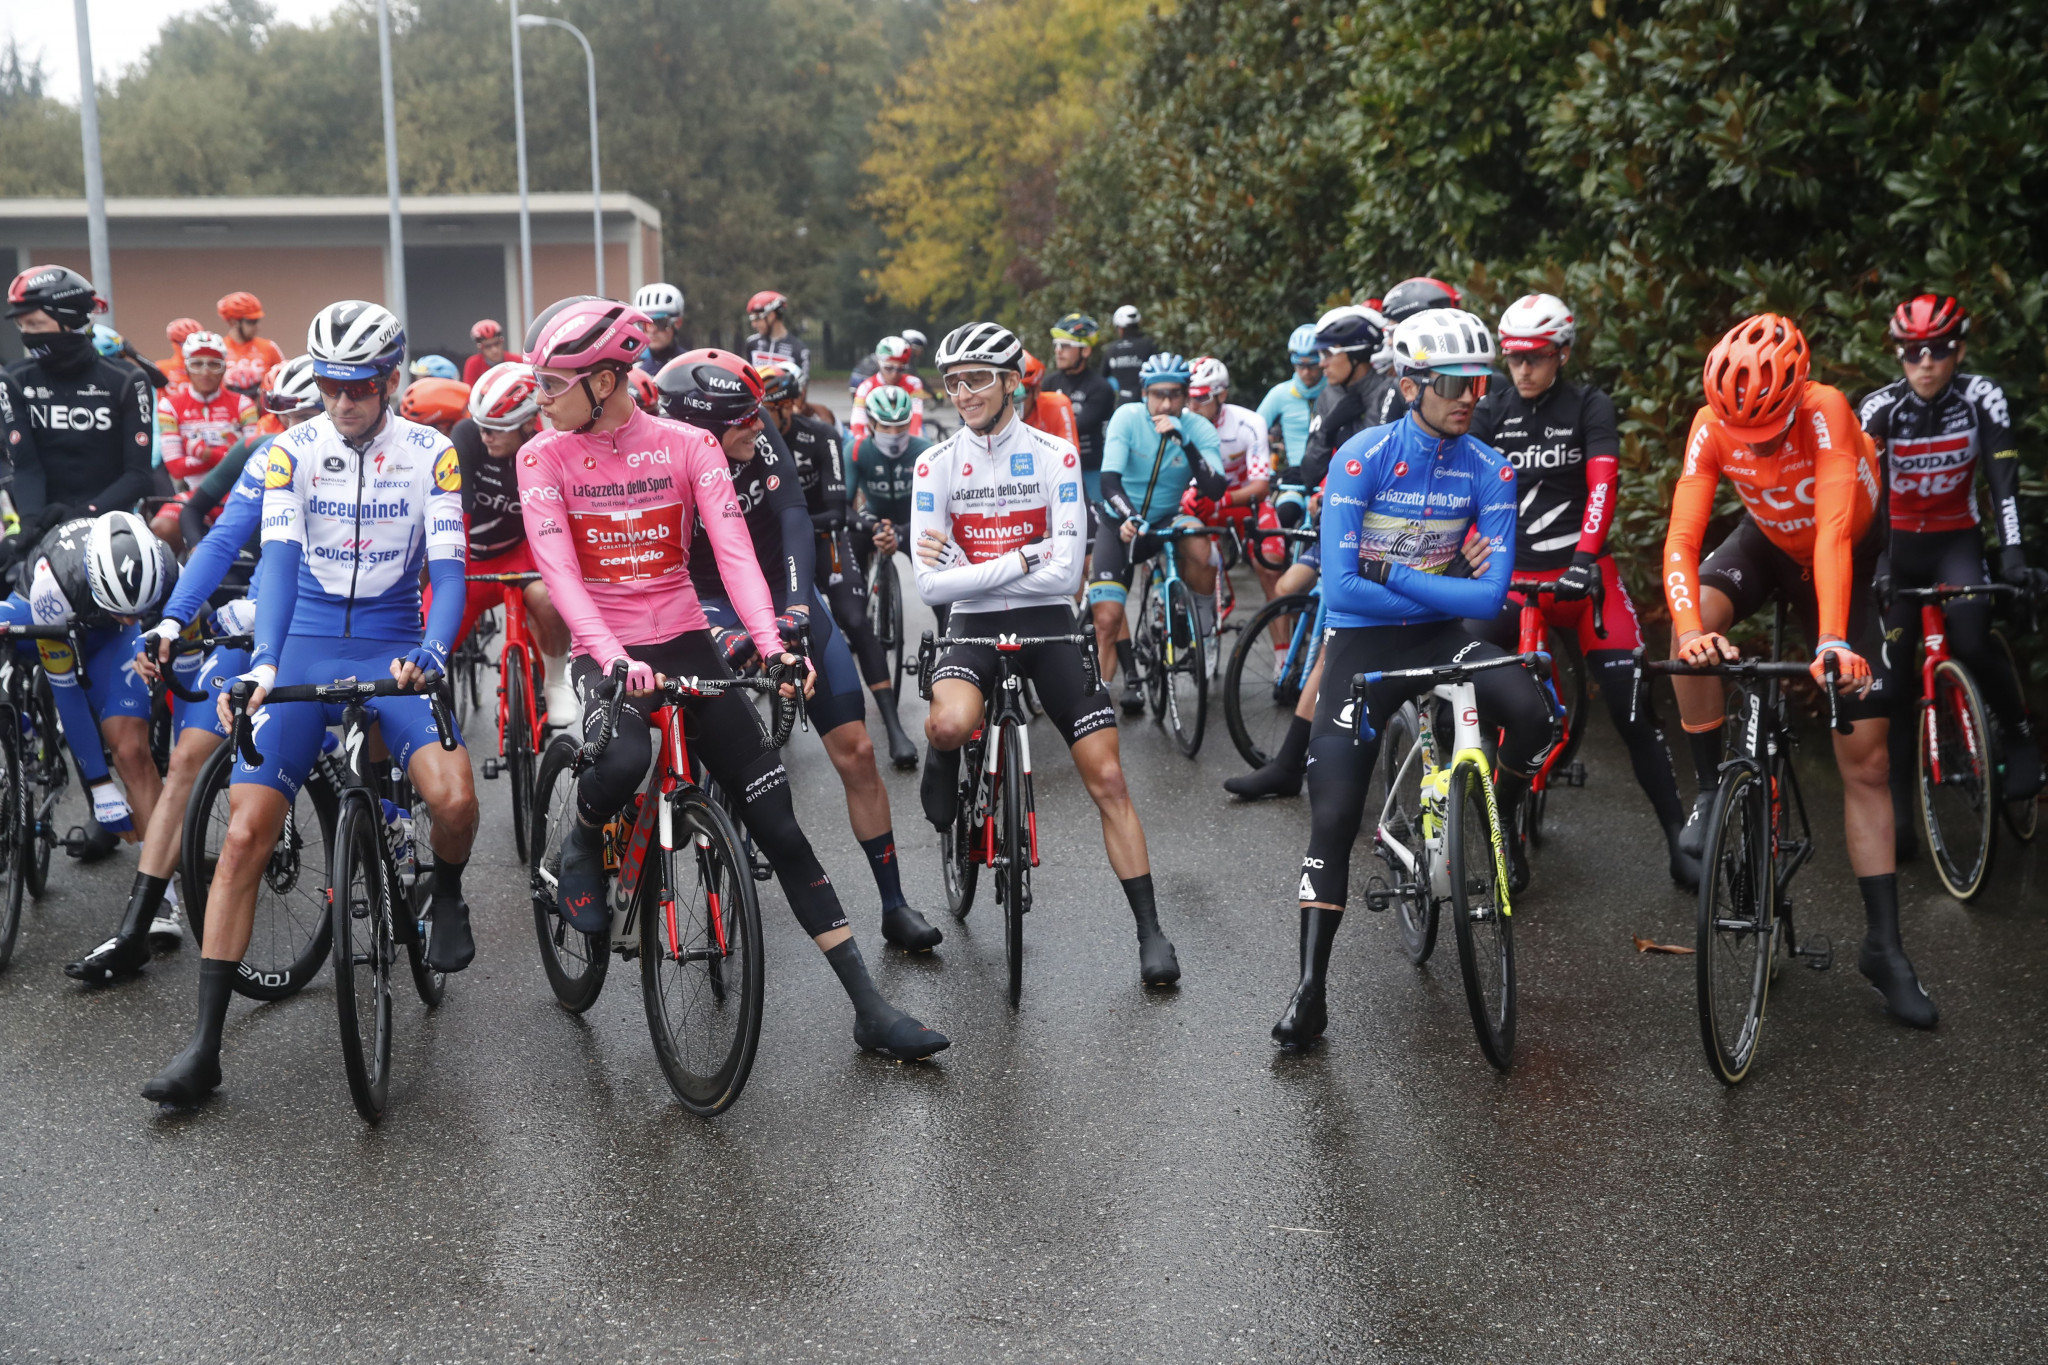 Cyclists were not happy to complete the longest stage of the Giro d'Italia in poor weather conditions ©Getty Images